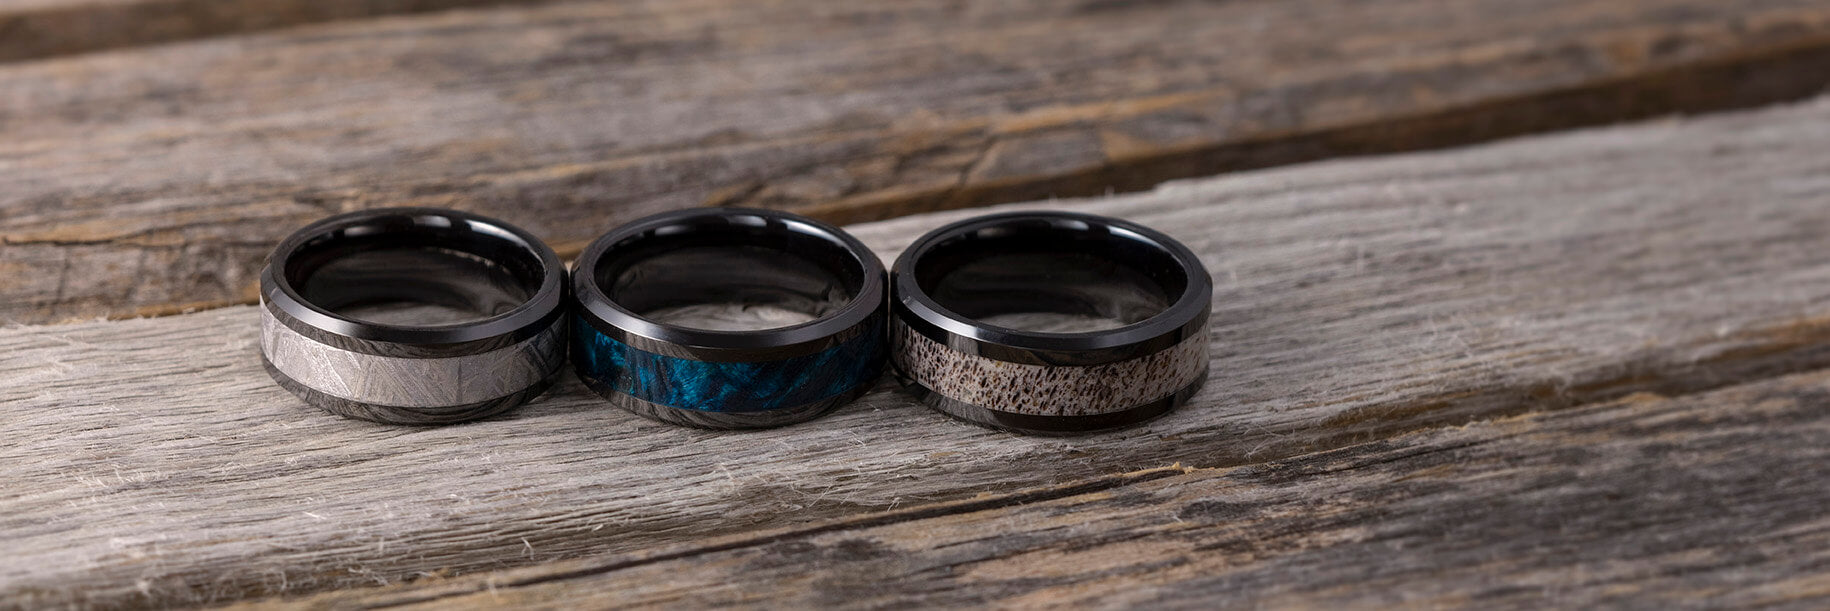 Black Wedding Bands for Men and Women from Jewelry By Johan